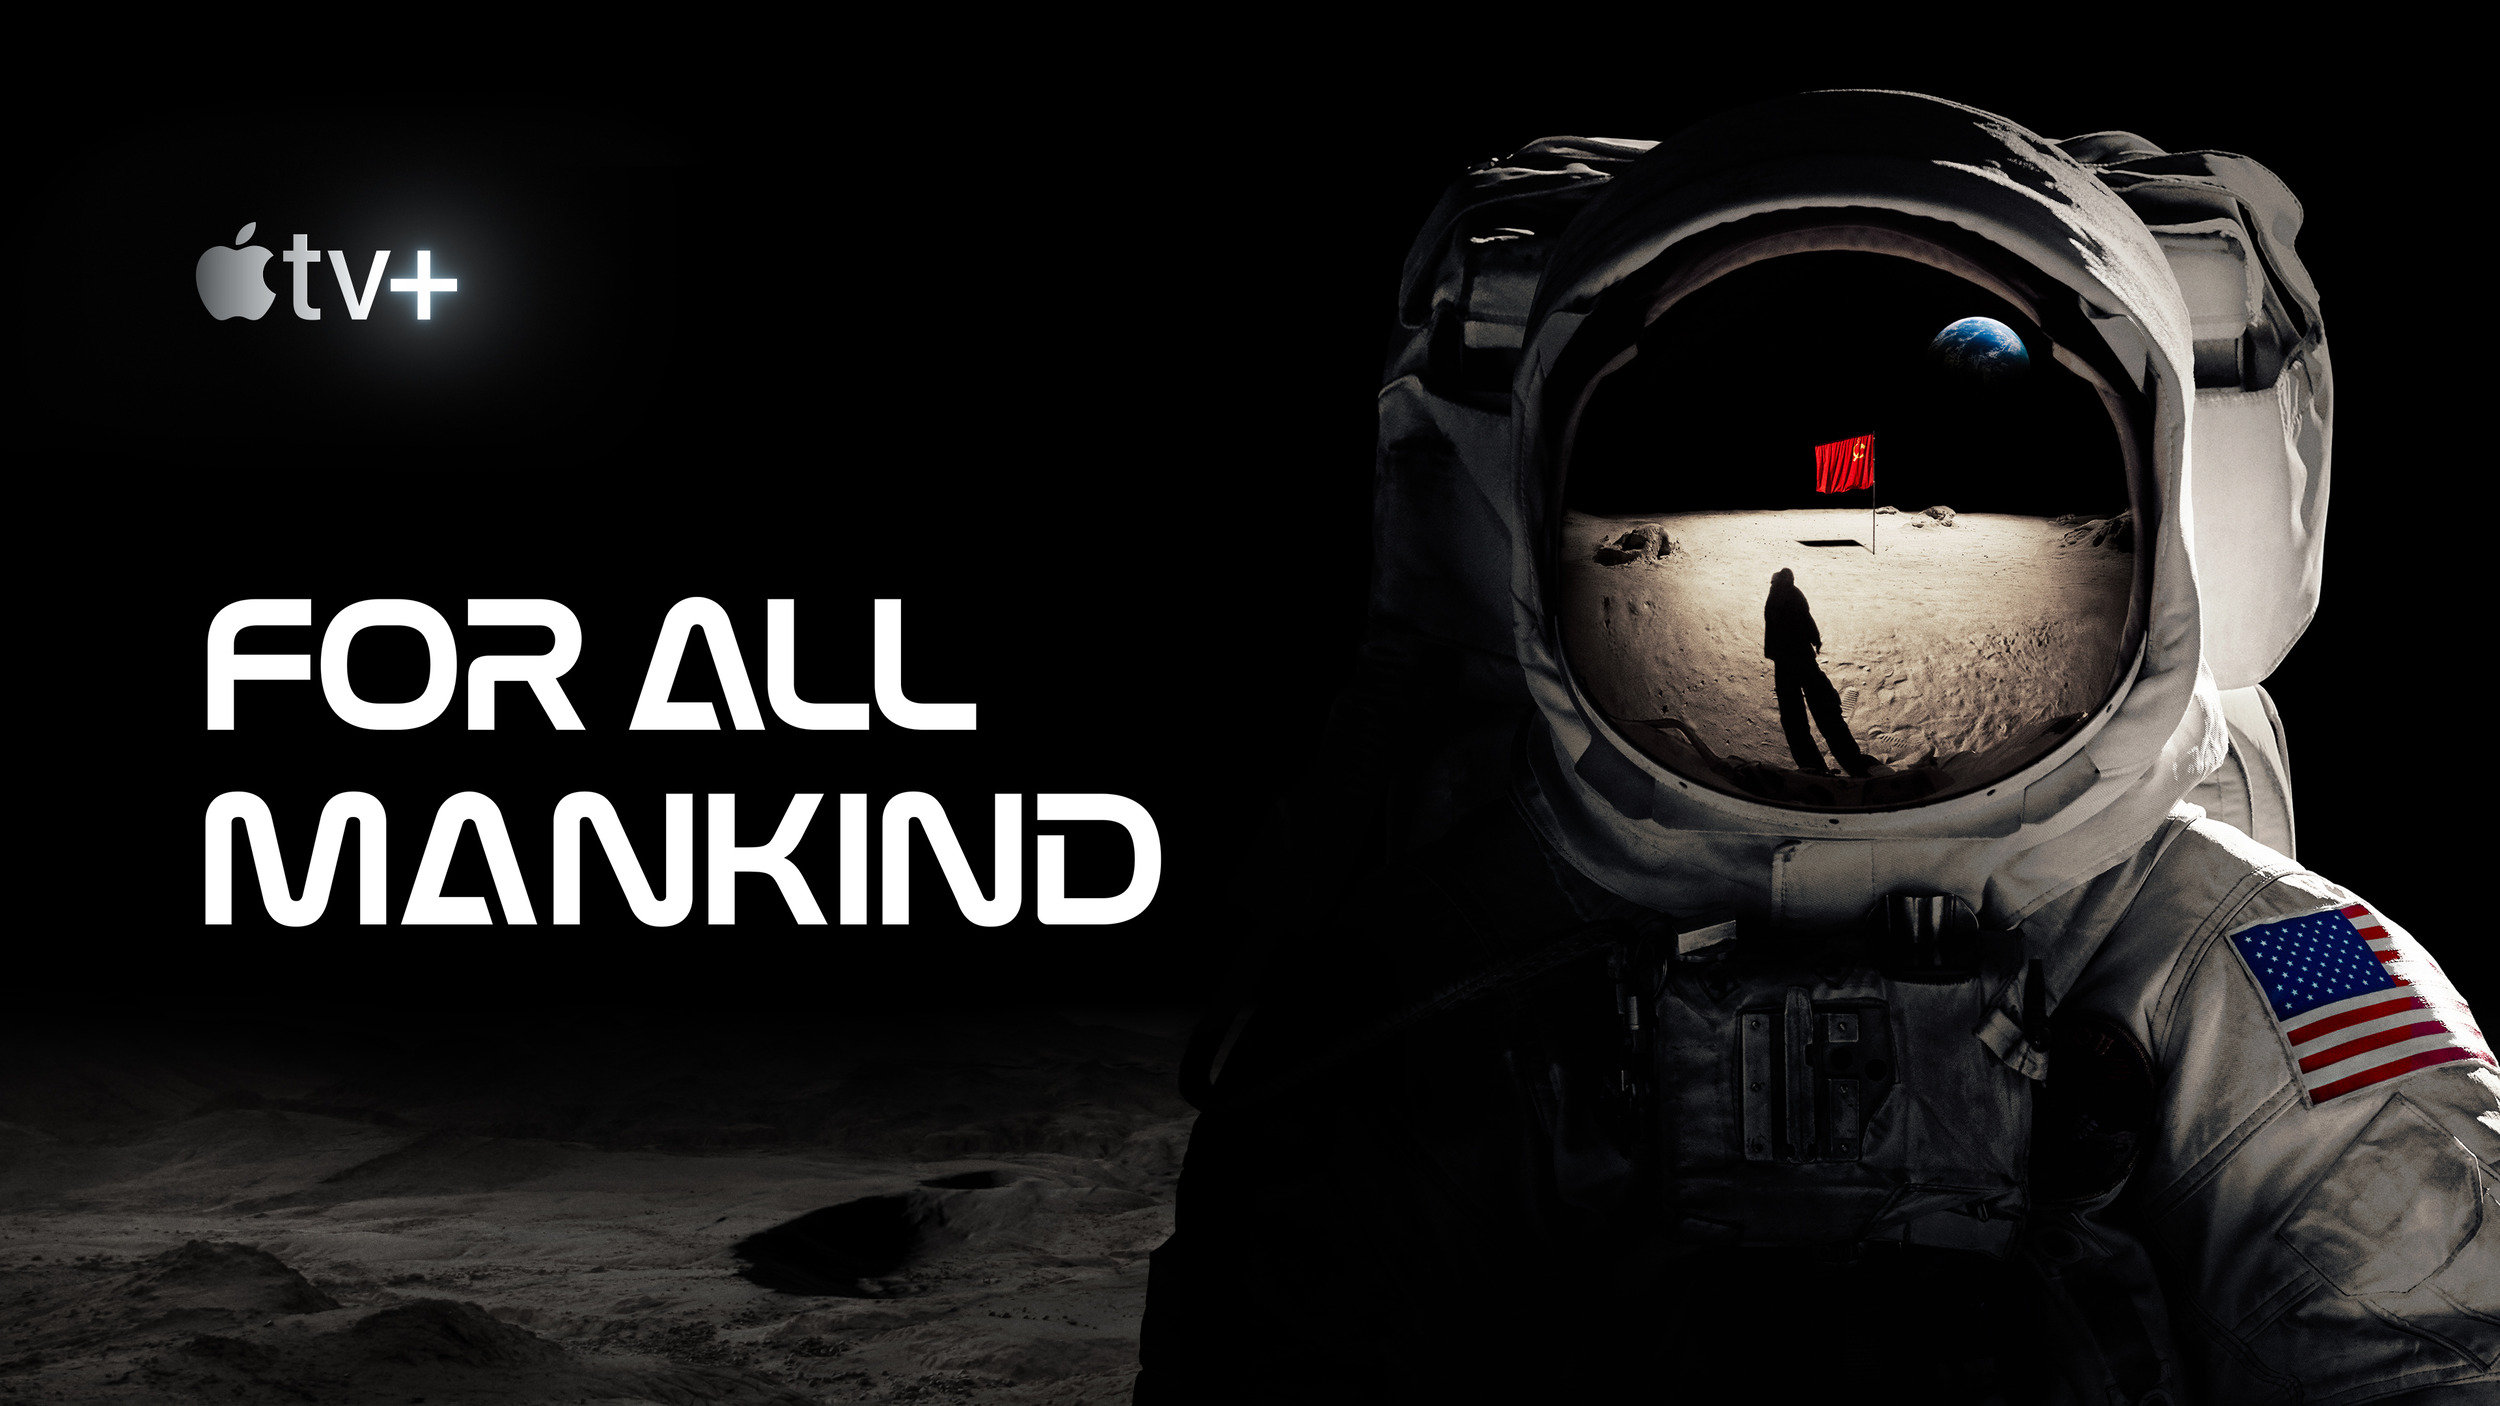 Mega Sized TV Poster Image for For All Mankind (#2 of 7)